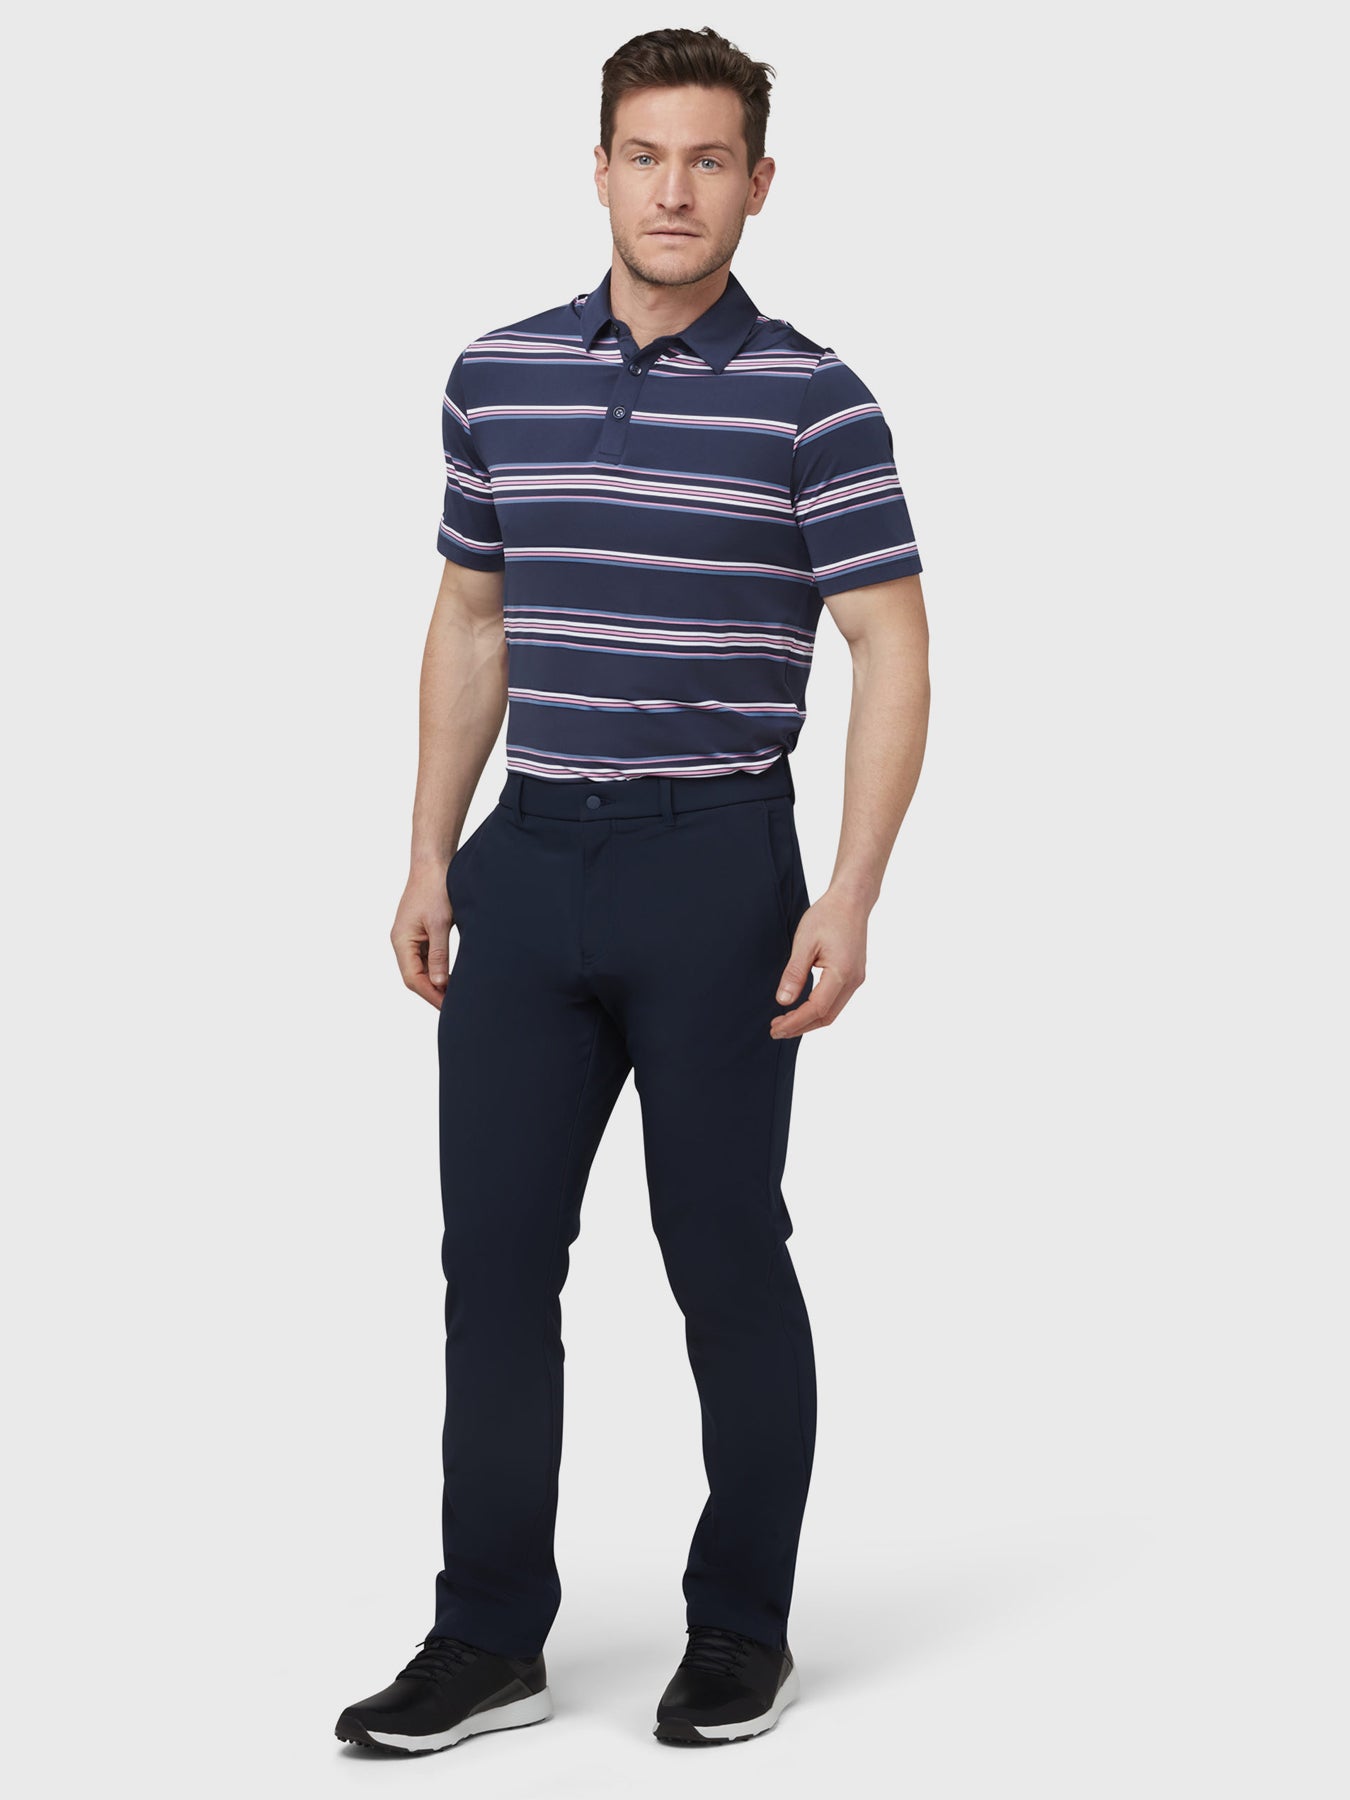 View Resort Ventilated Stripe Golf Polo In Peacoat information